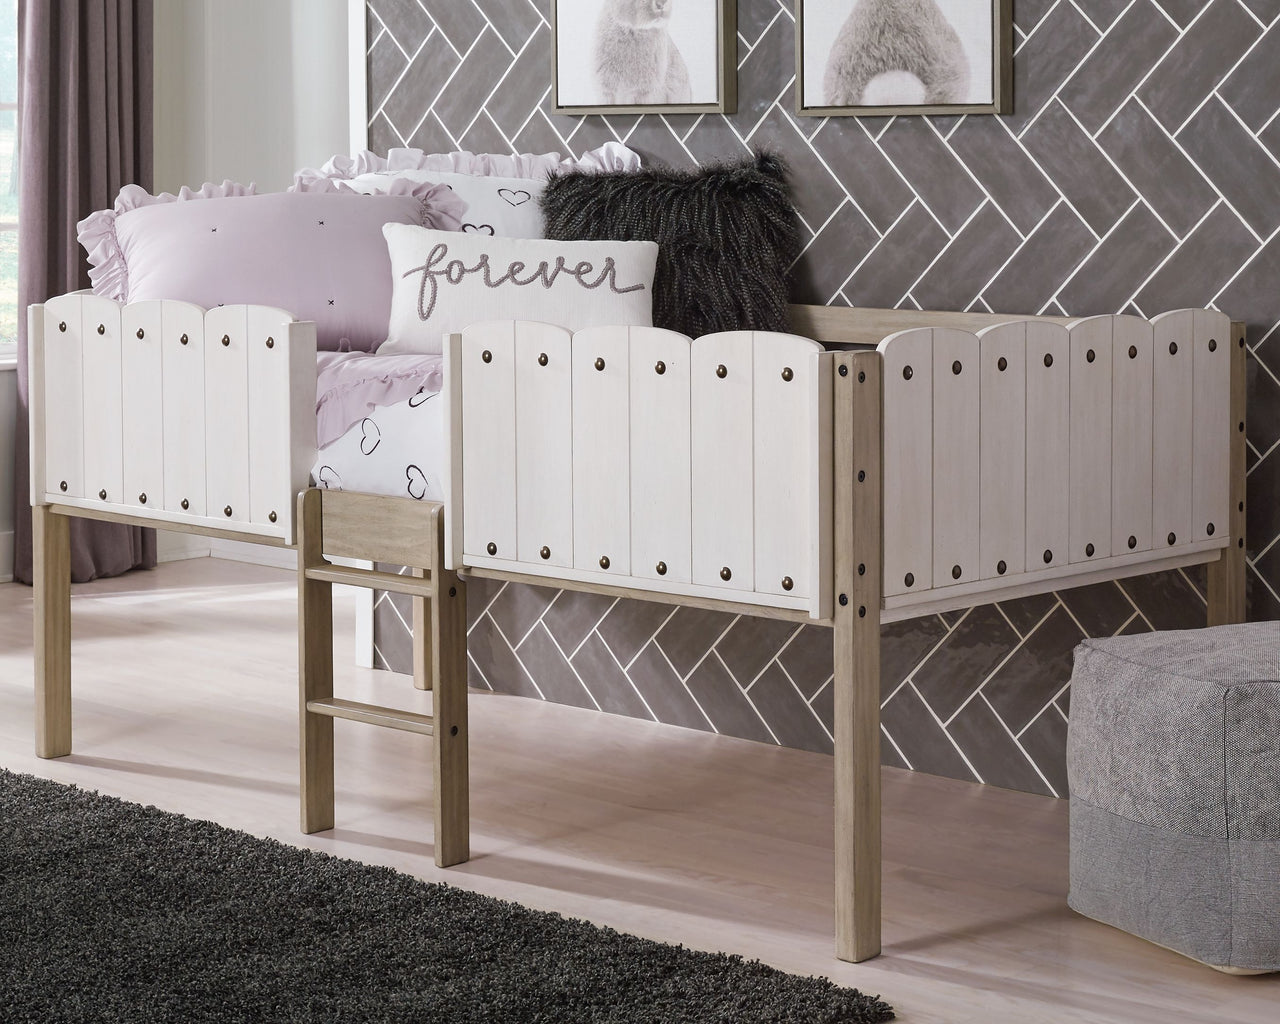 Wrenalyn - Loft Bed Frame Tony's Home Furnishings Furniture. Beds. Dressers. Sofas.